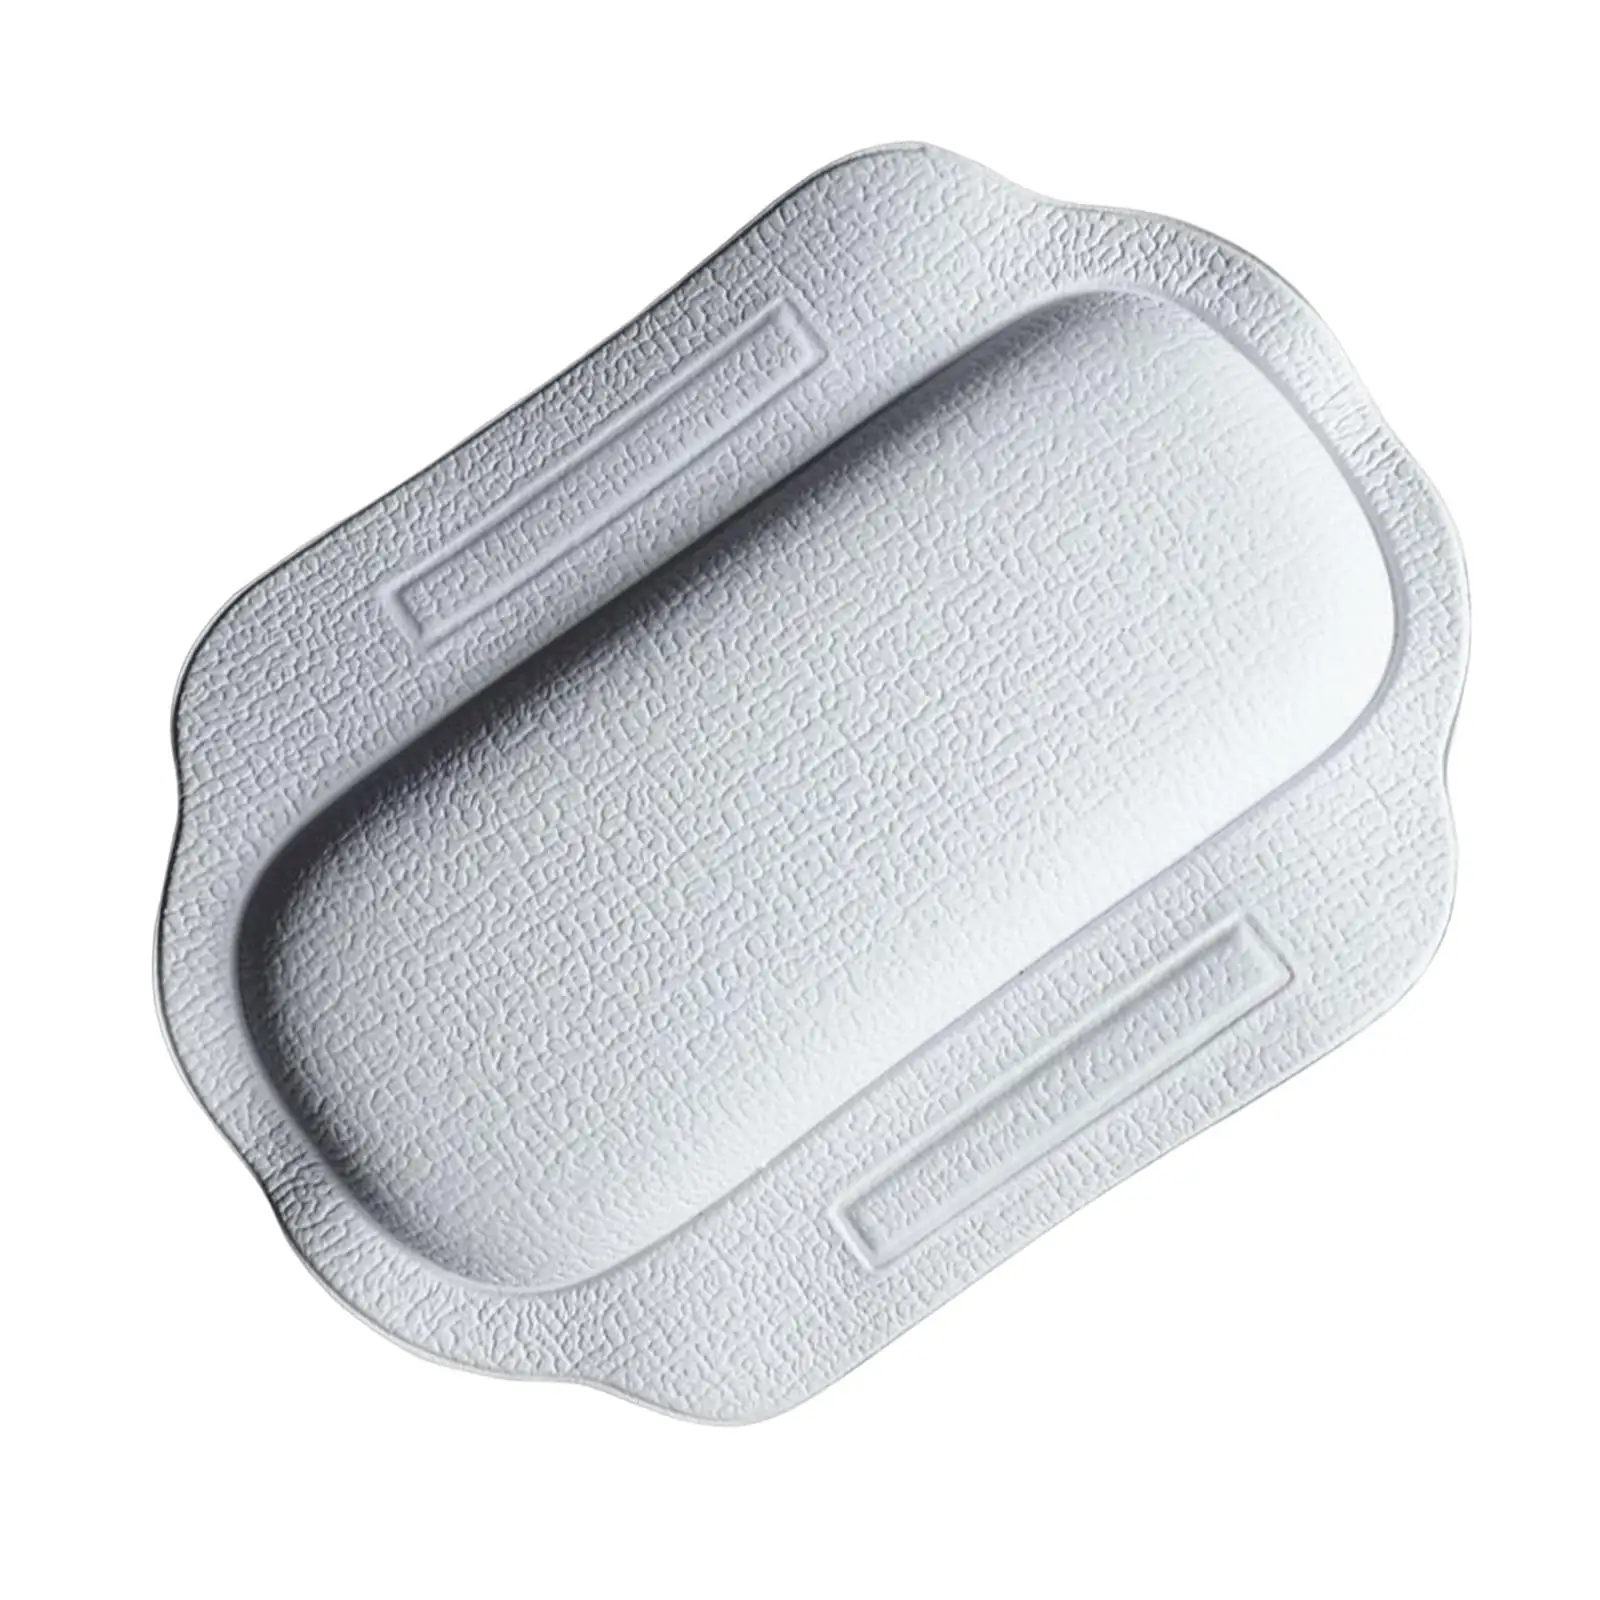 Bath Pillow Quick Drying Accessories with Suction Cups Comfortable Non Slip Waterproof Relax Comfy Headrest Tub Pillow Support